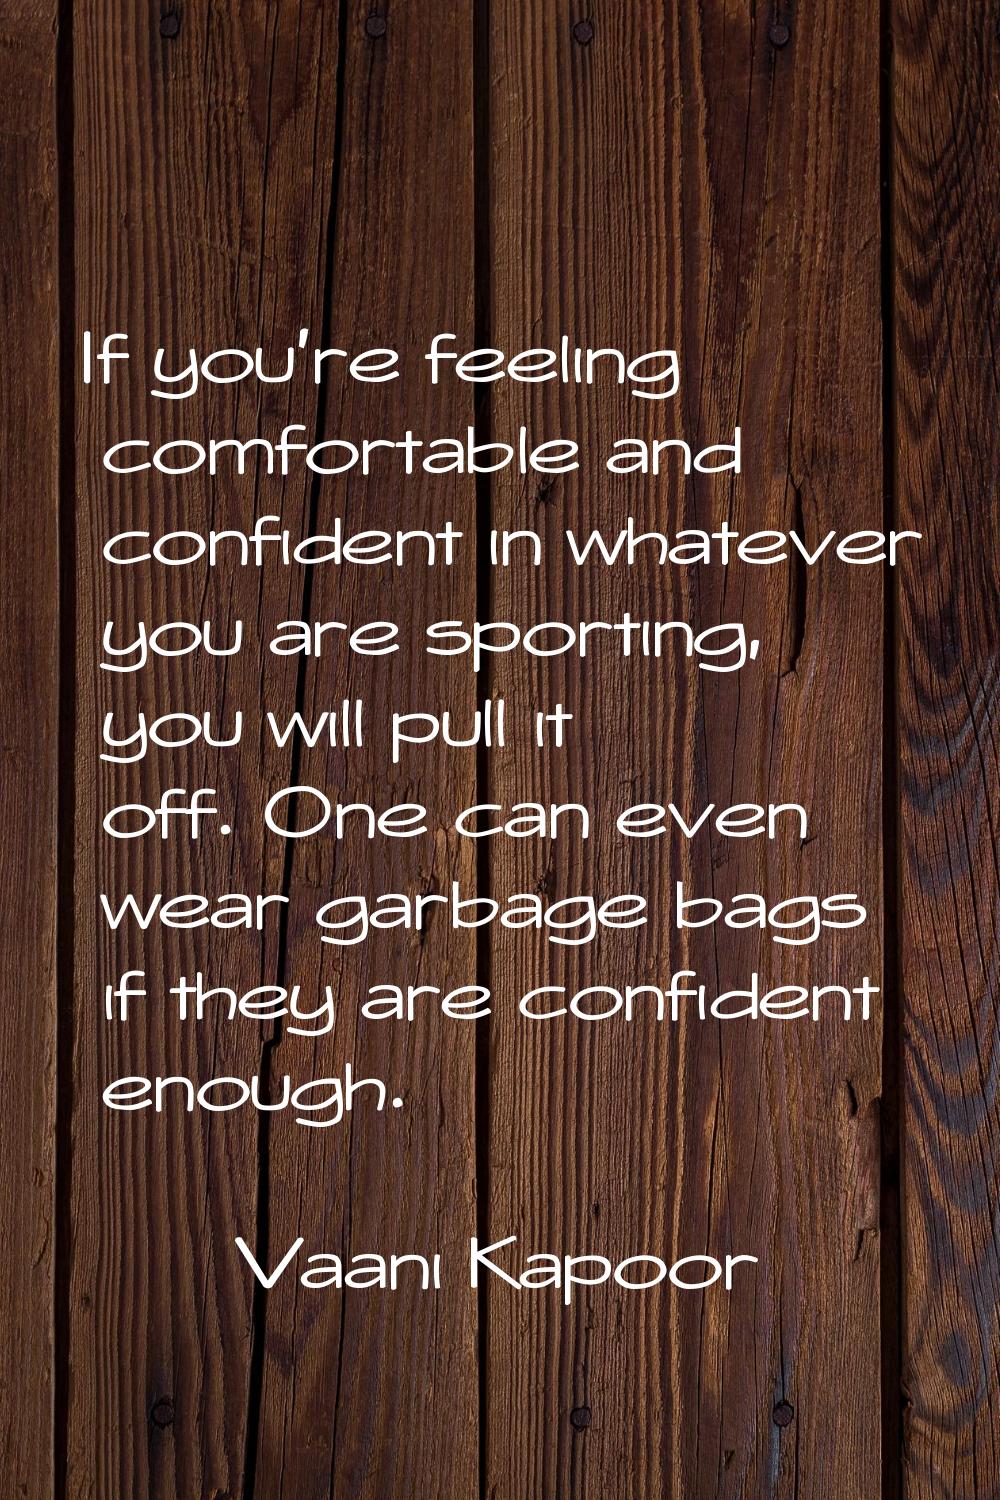 If you're feeling comfortable and confident in whatever you are sporting, you will pull it off. One